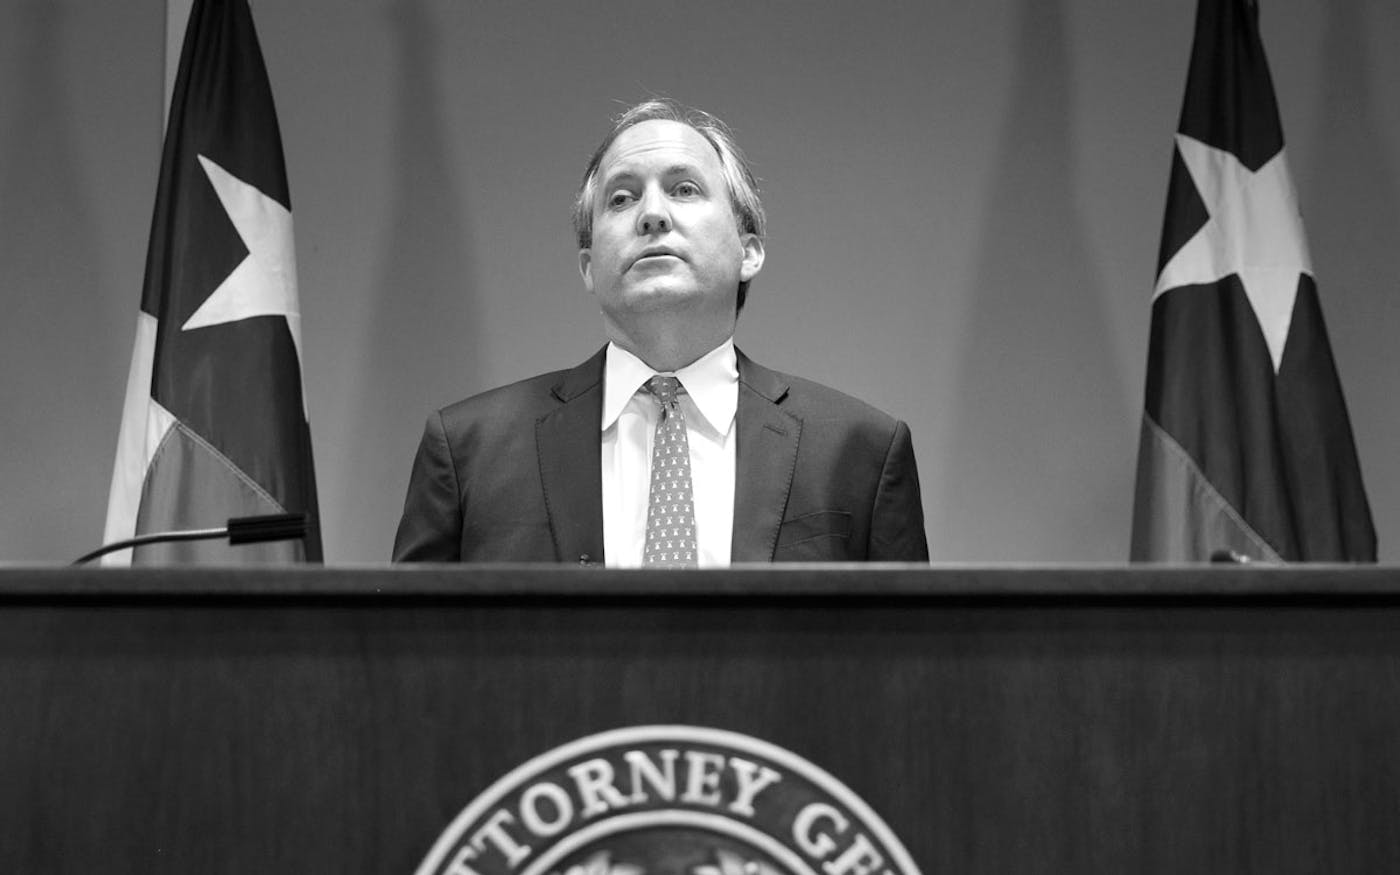 Ken Paxton Rules That Licensed Handgun Owners Can Bring A Firearm To Church